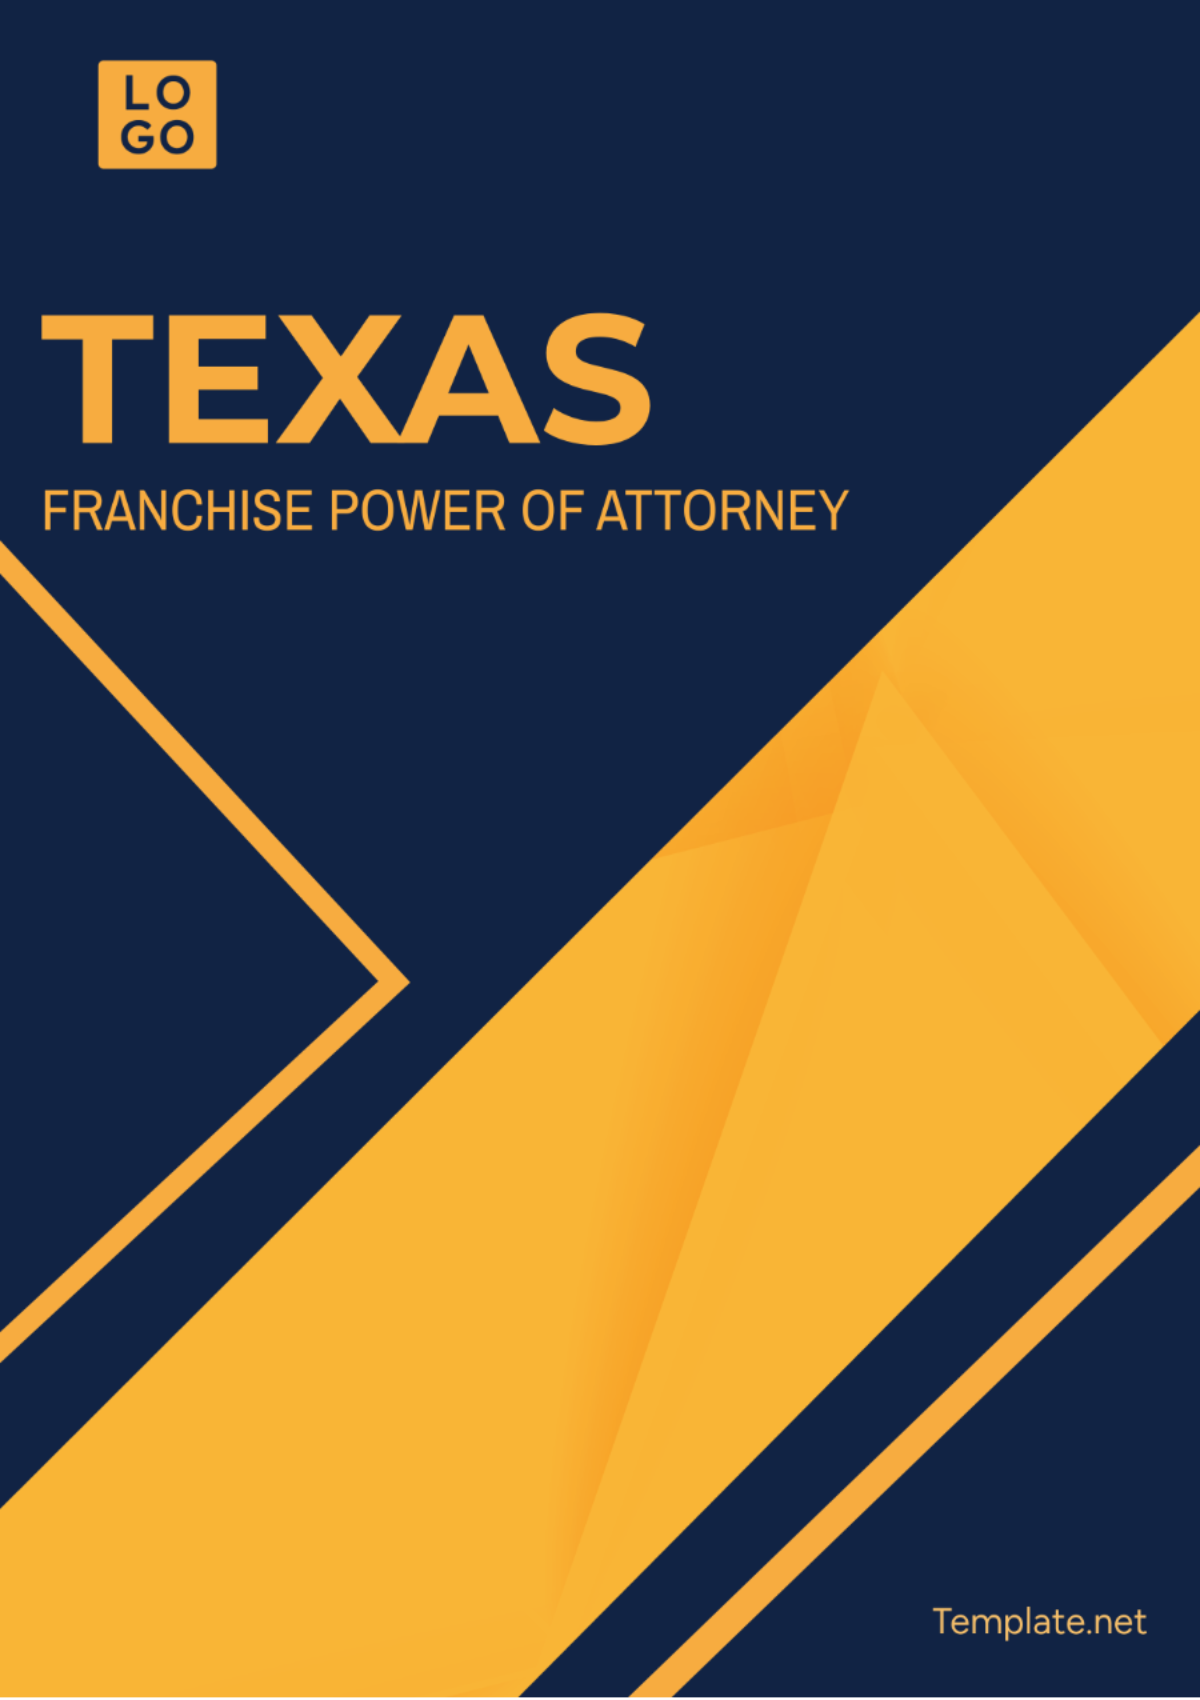 Texas Franchise Tax Power of Attorney Template